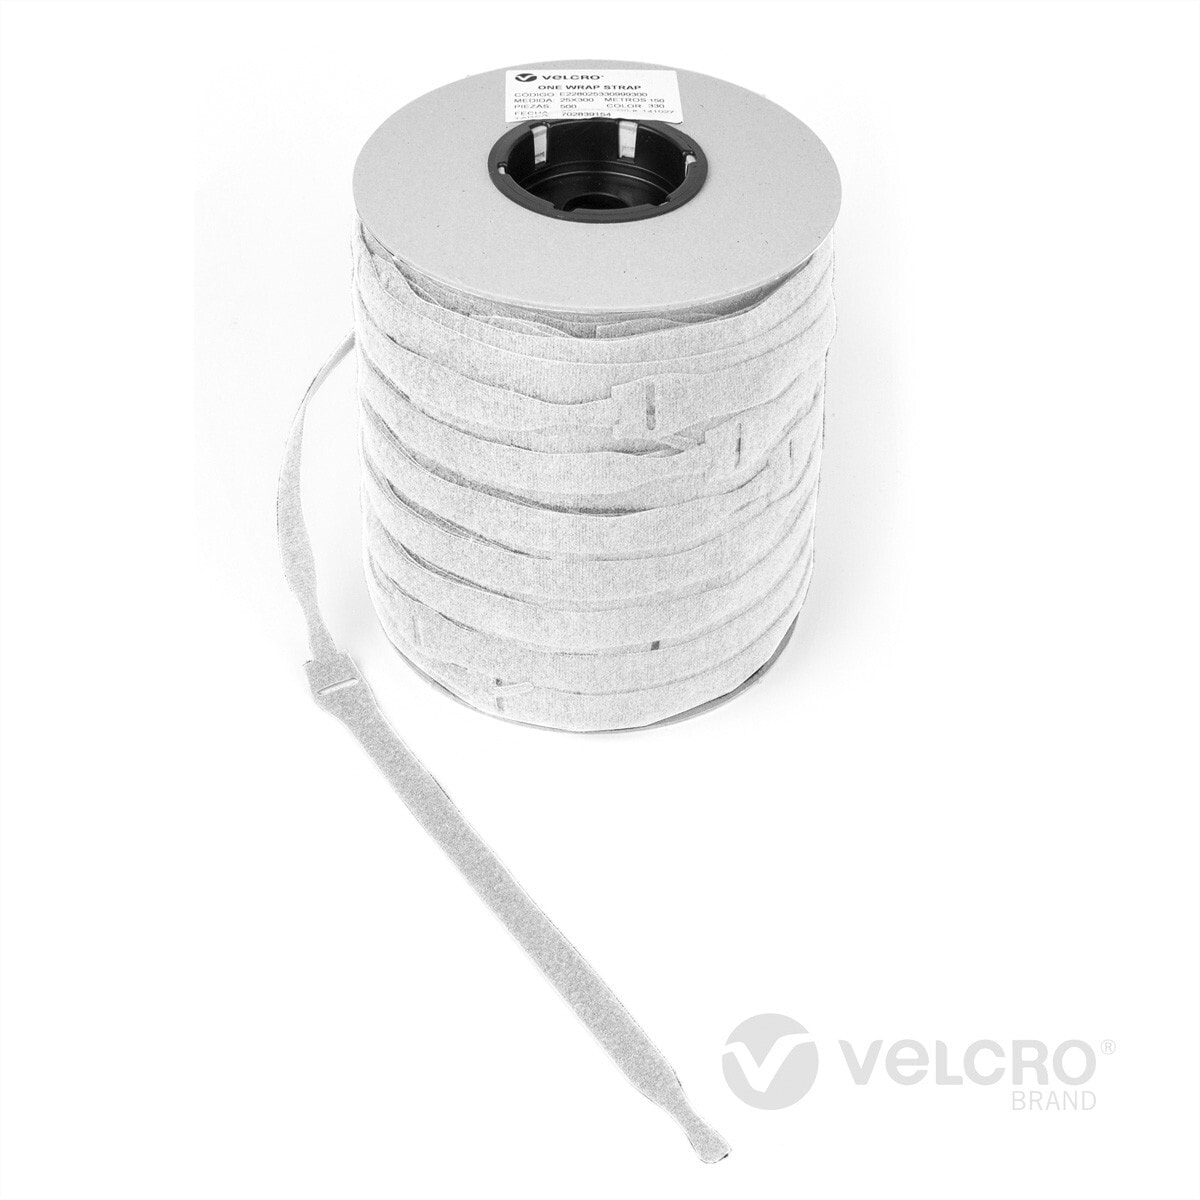 VELCRO ONE-WRAP - Releasable cable tie - Polypropylene (PP) -  - White - 300 mm - 25 mm - 750 pc(s)